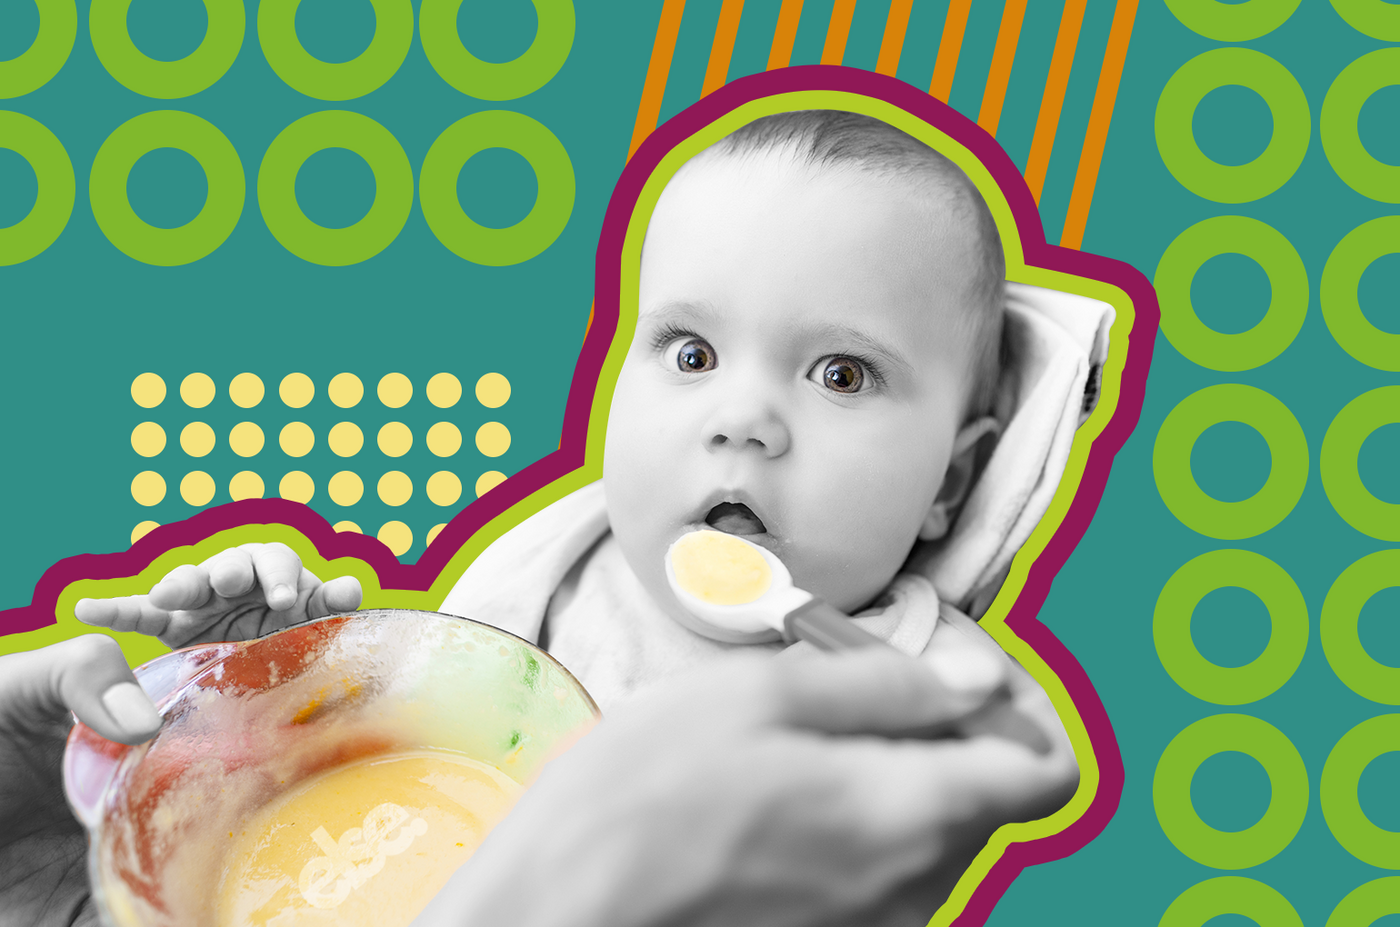 Nutrition in Infants - Get to Know Your Baby's Nutritional Needs